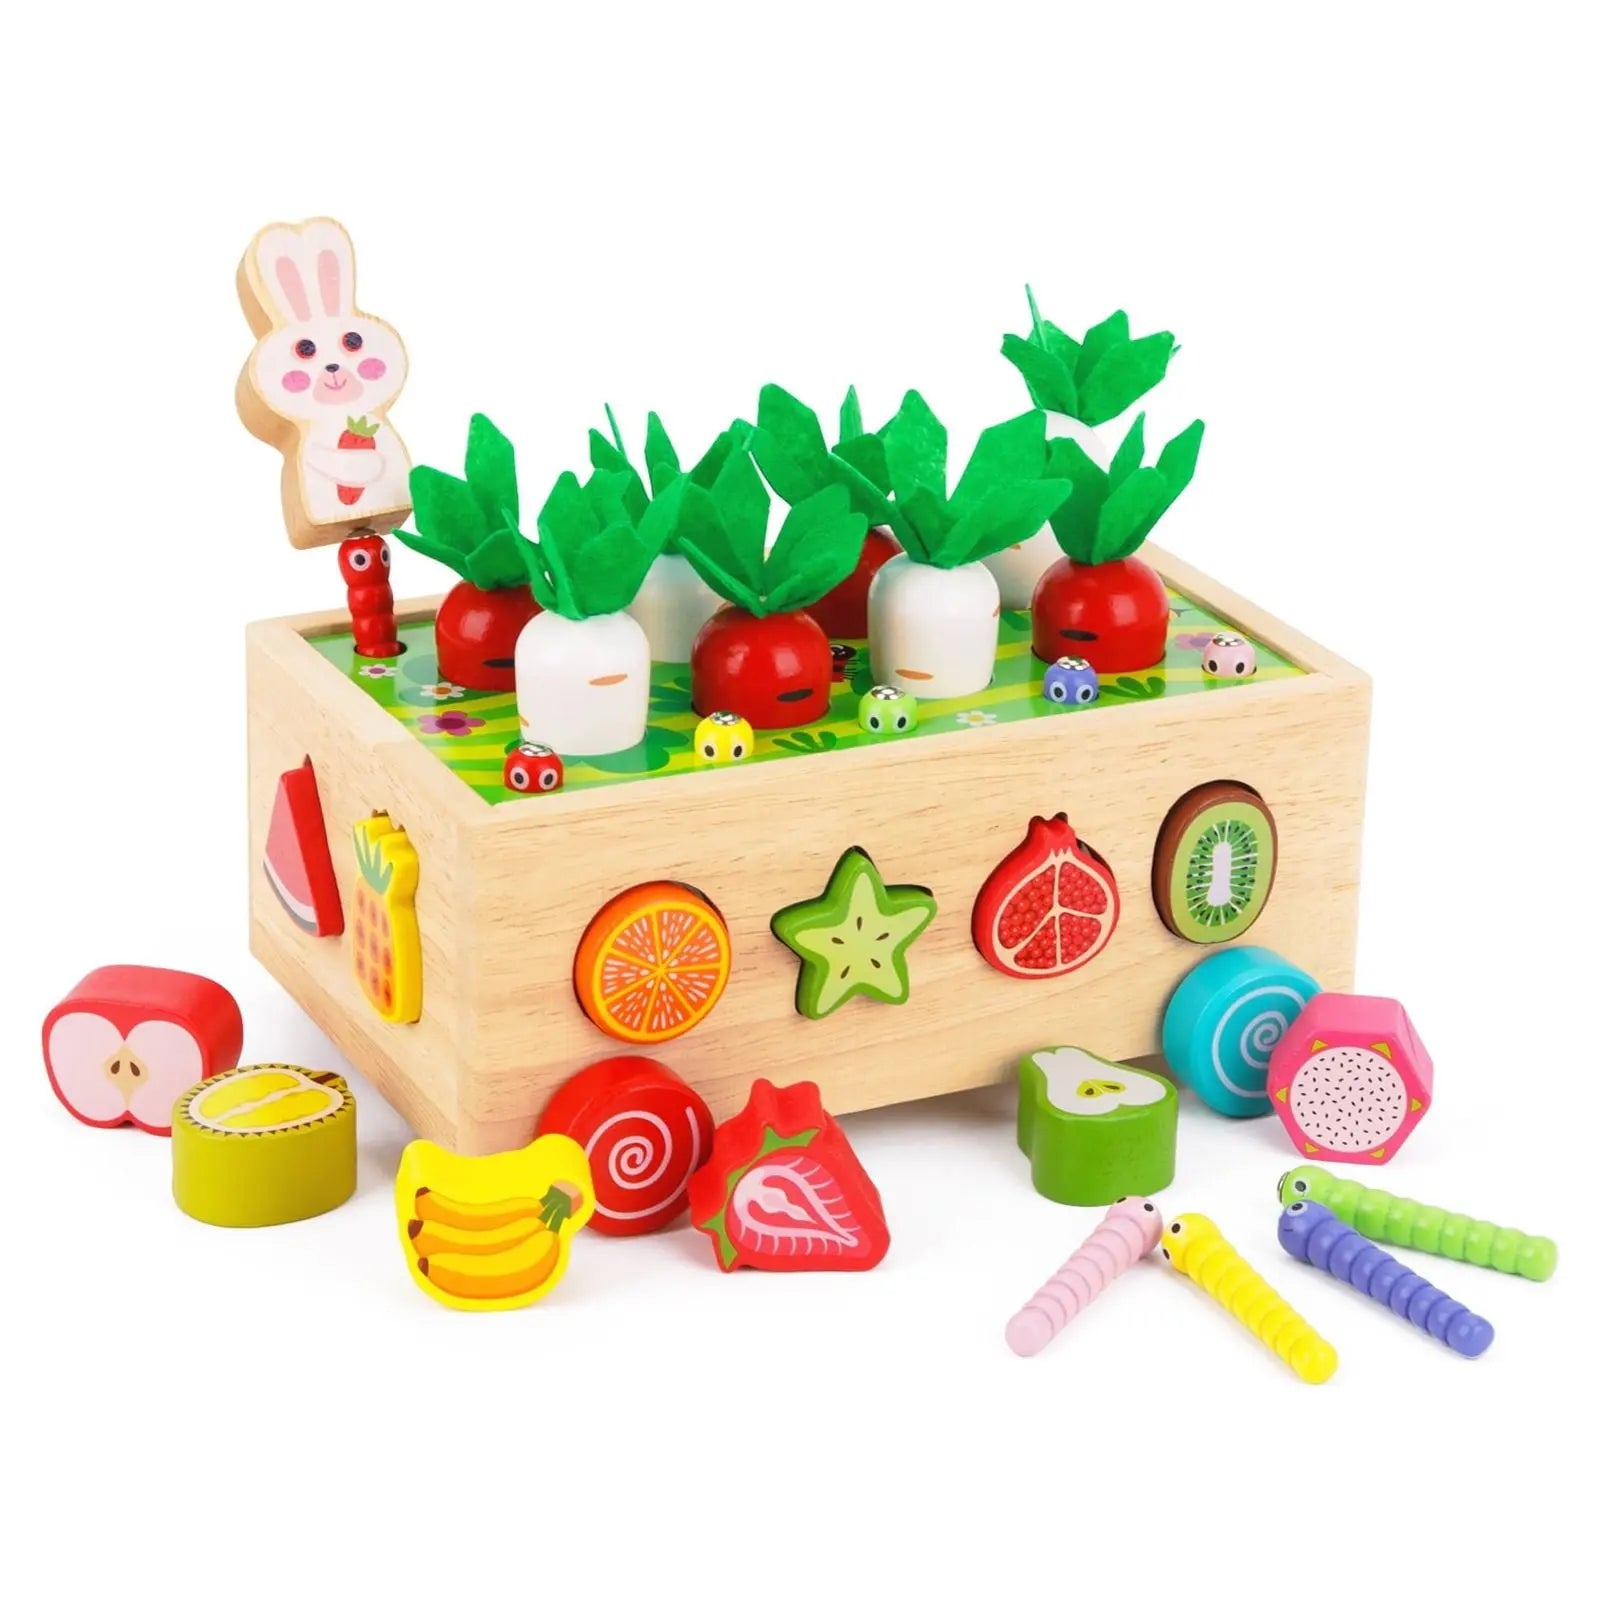 Toddlers Montessori Wooden Educational Toys for Baby Boys Girls On Wooden